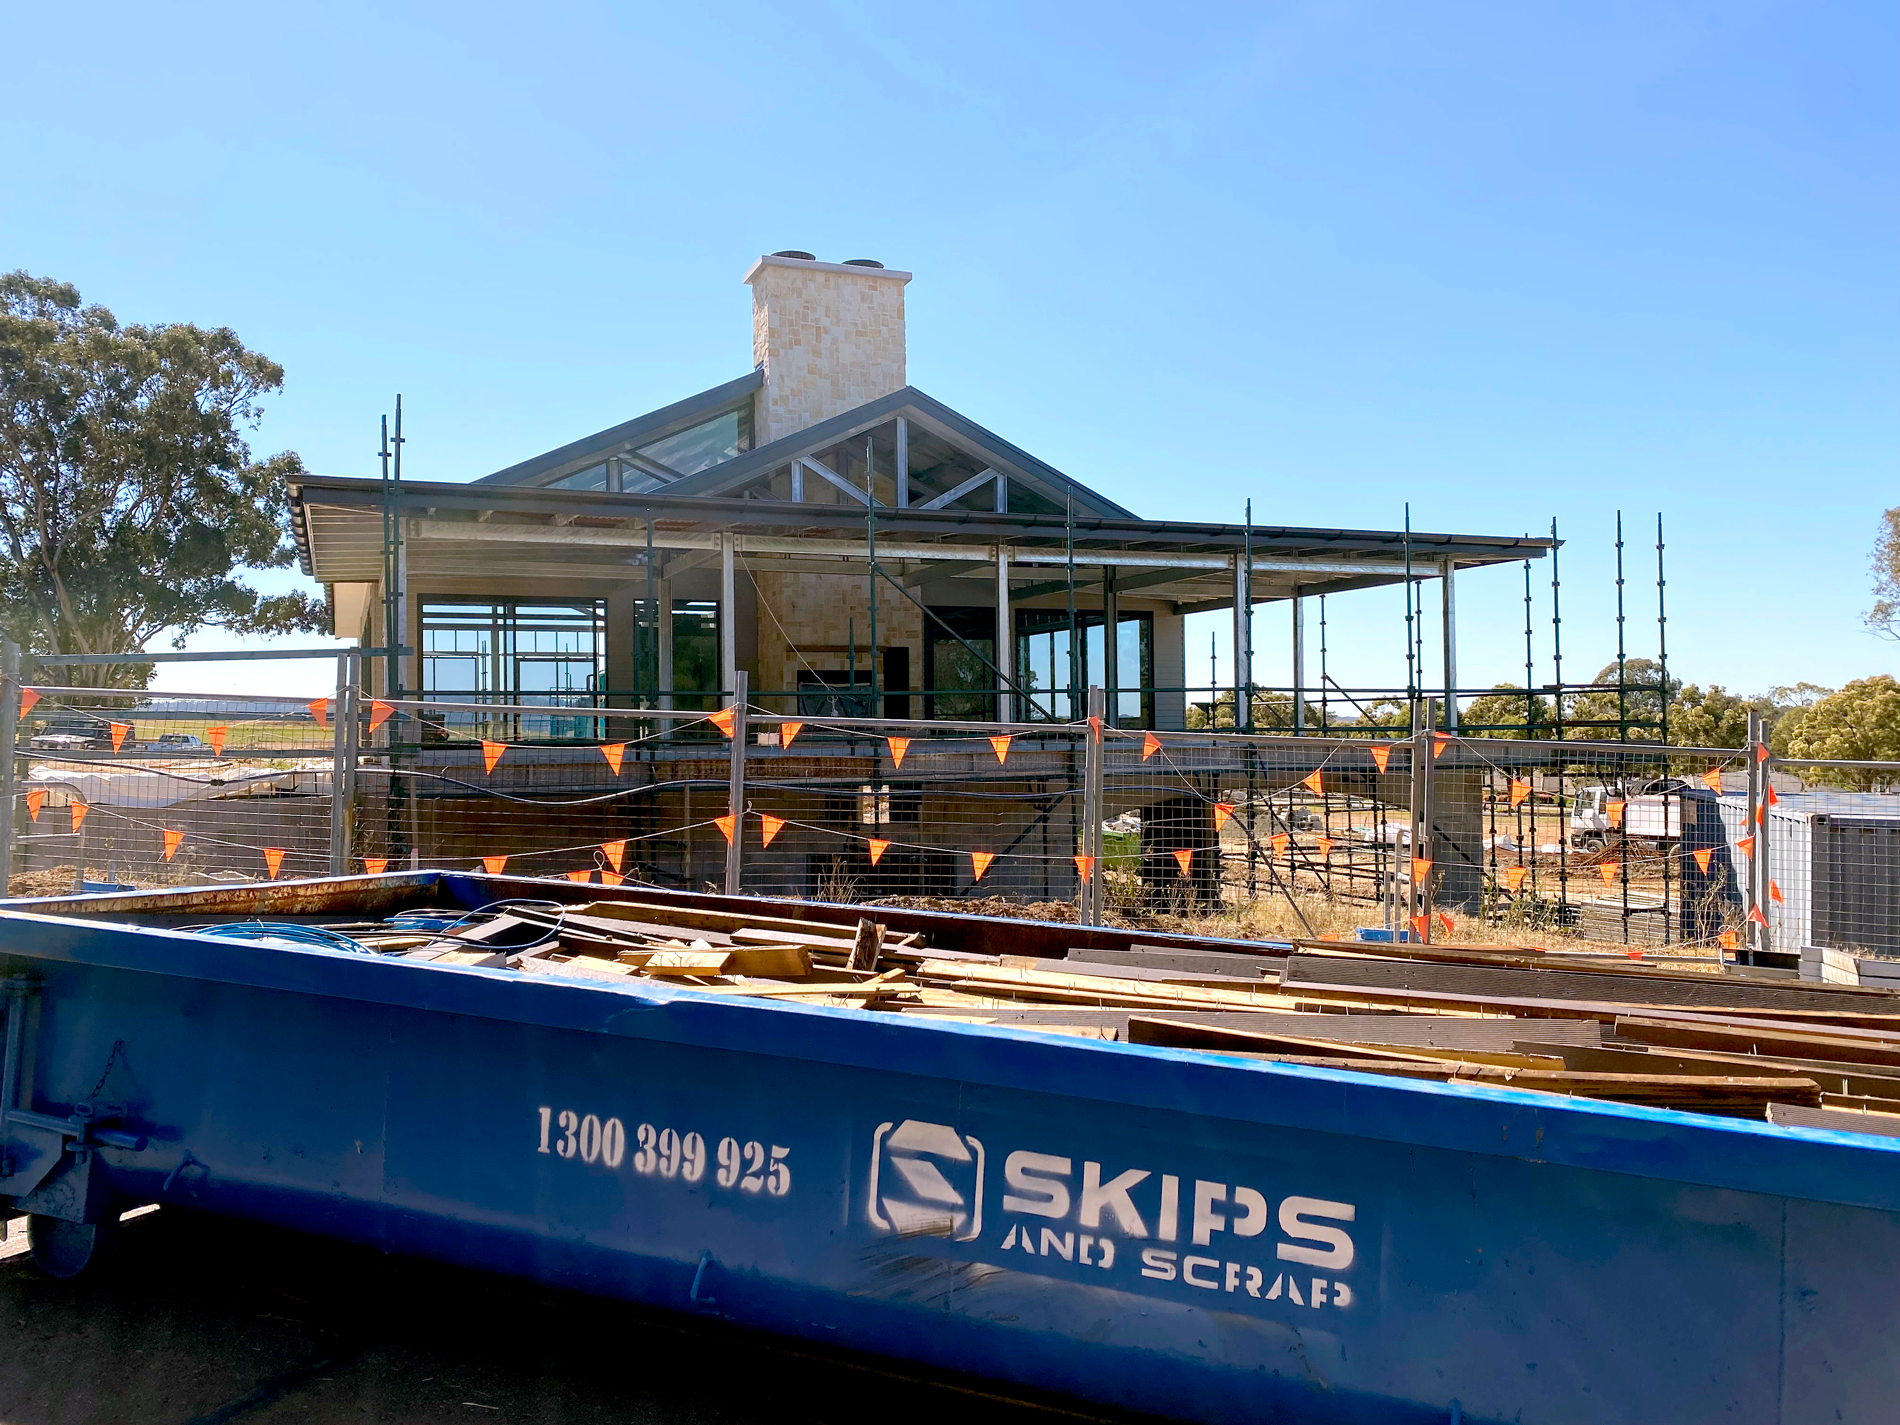 For your larger renovation projects, you can hire one of the large range of size skip bins to collect and dispose of the scrap. We can place our marvel skip bin or hook skip bin in a convenient location on your property.